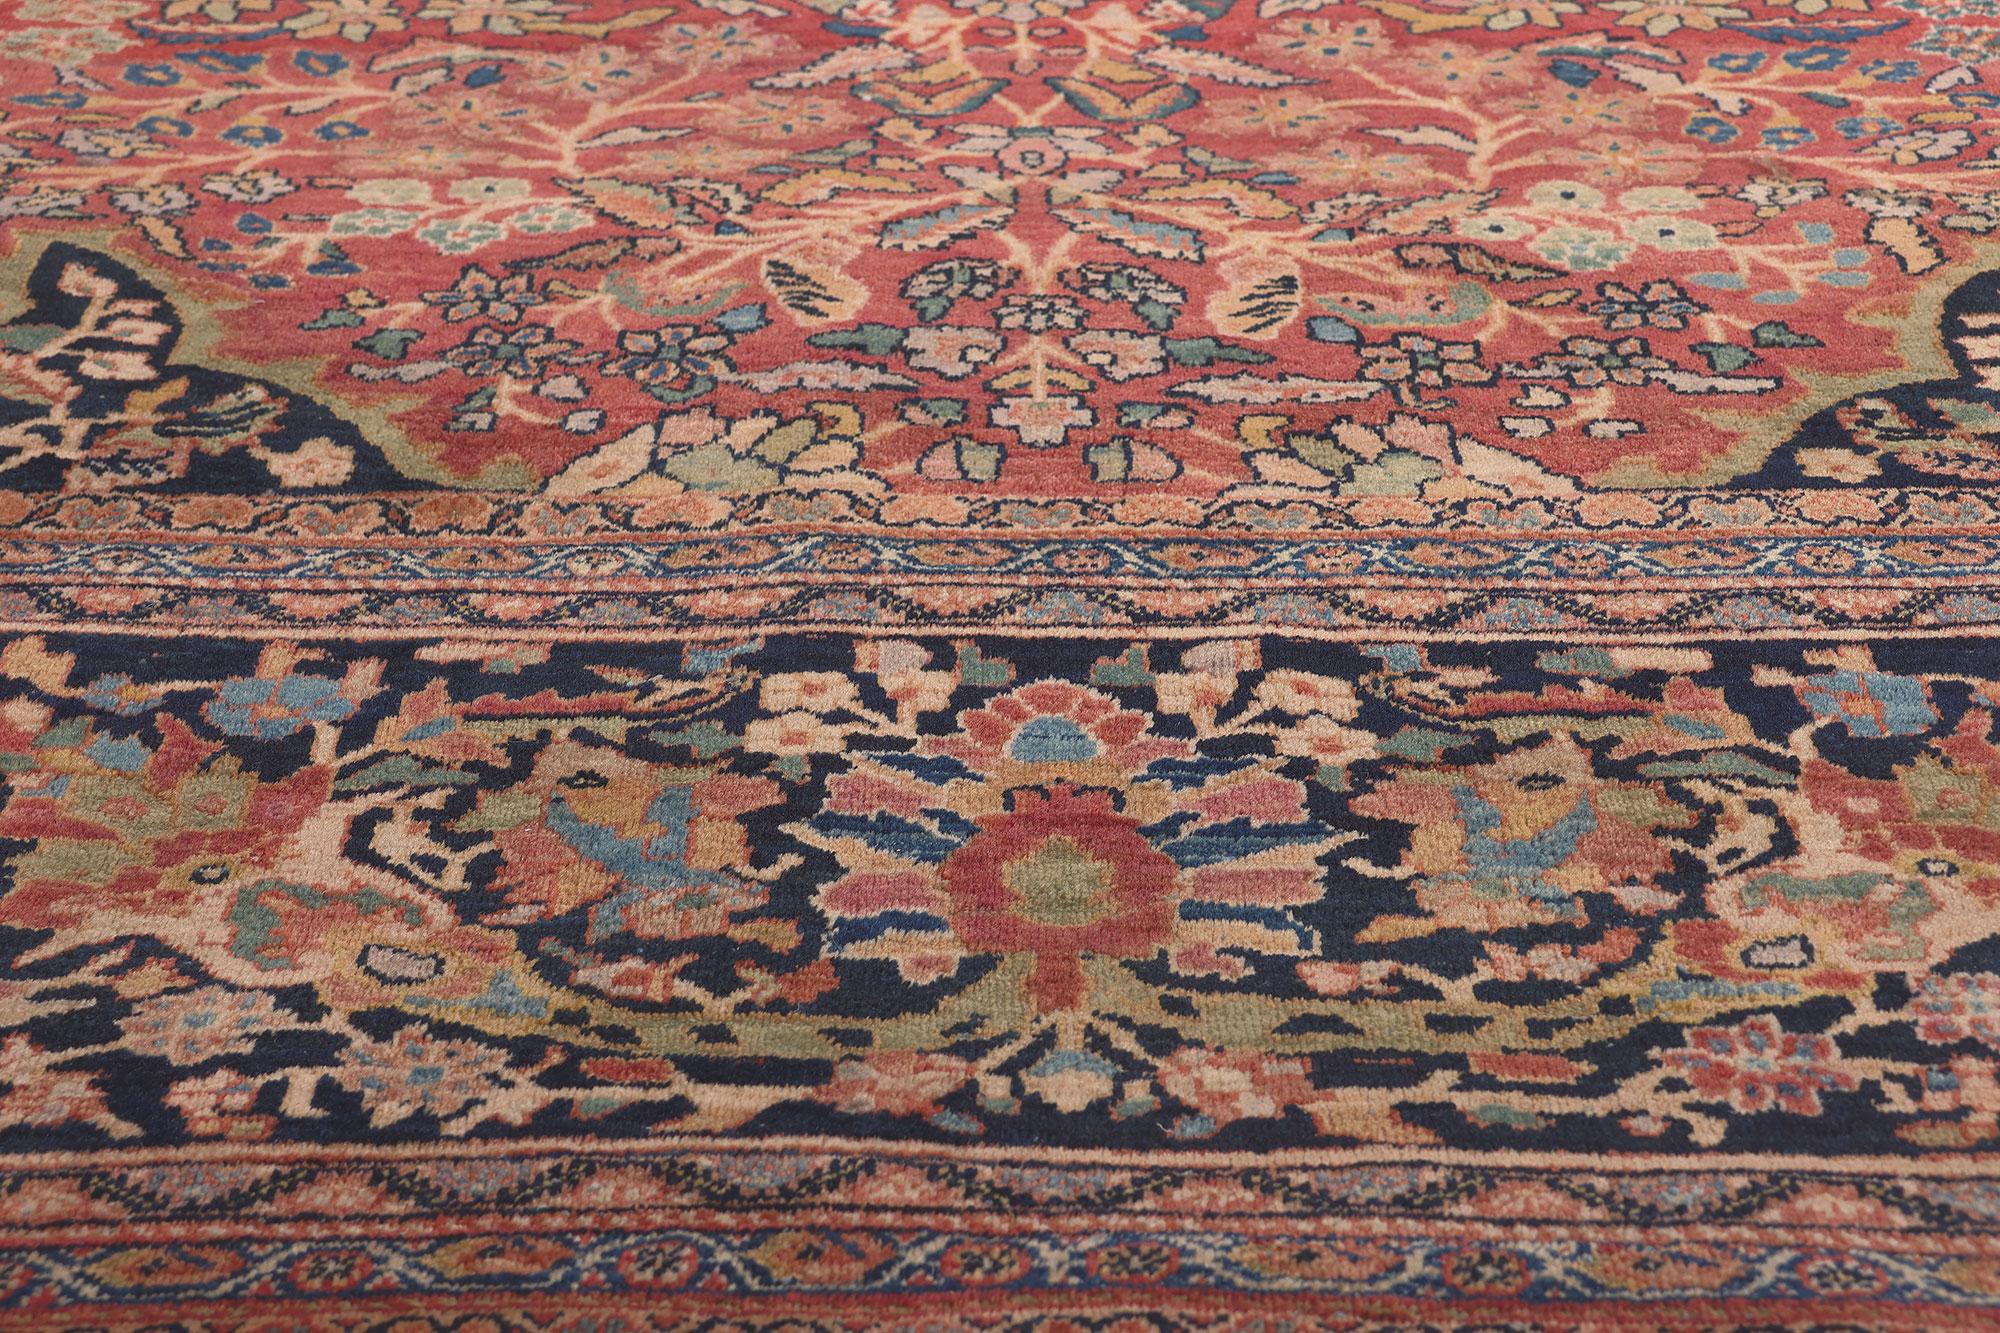 Oversized Antique Persian Farahan Rug, Hotel Lobby Size Carpet In Good Condition For Sale In Dallas, TX